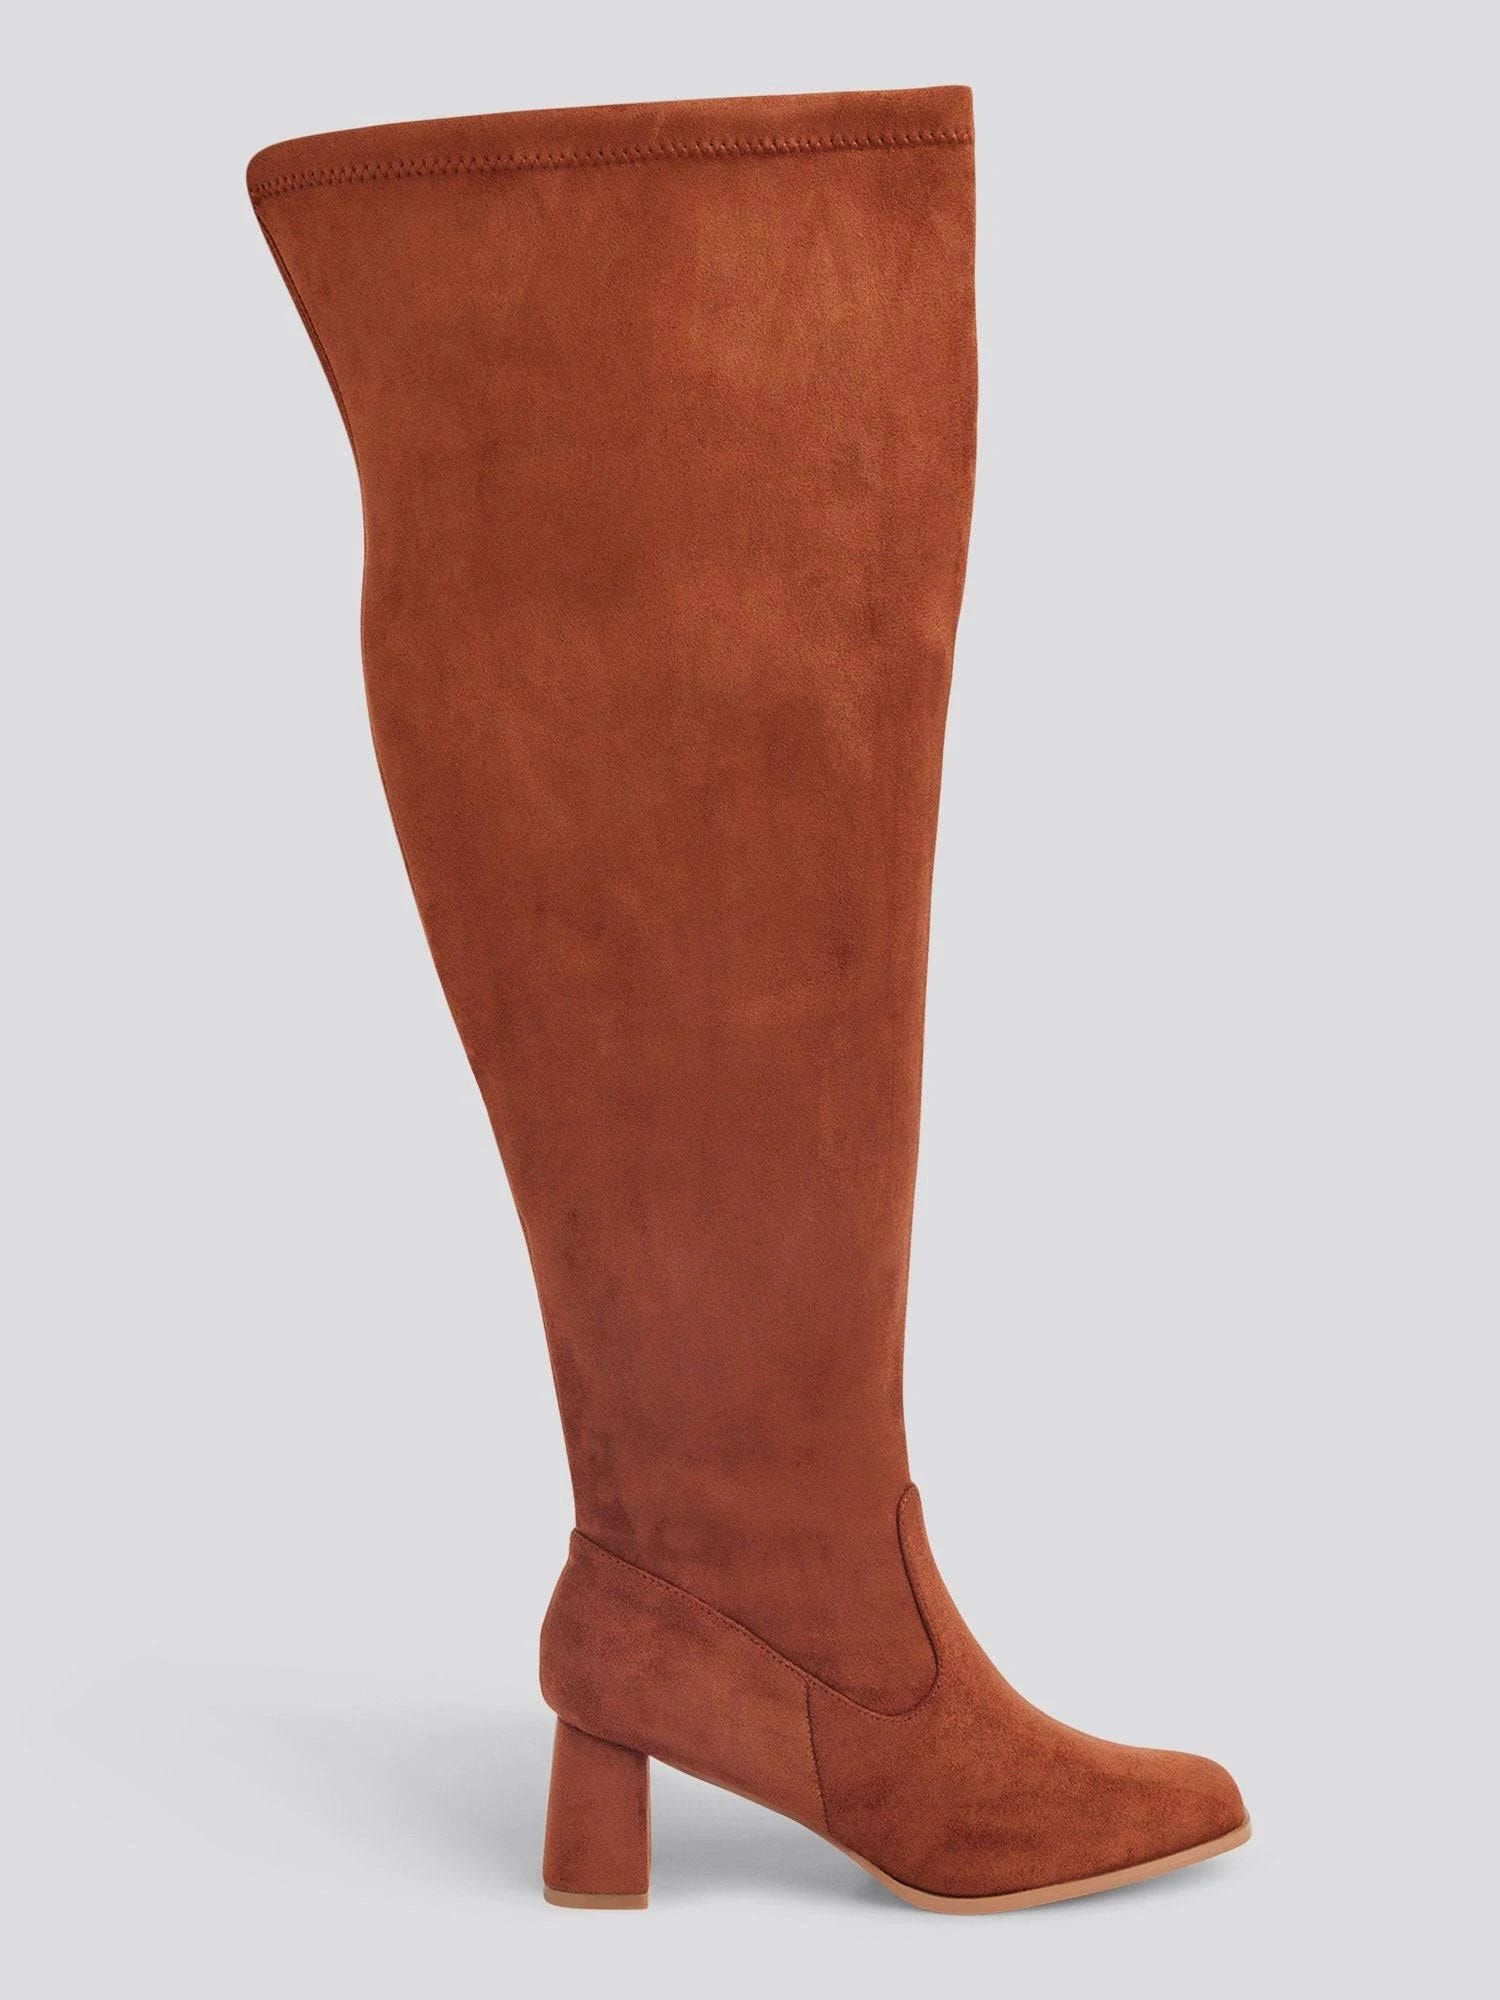 Fashionable Cognac Over-the-Knee High Boots by Fashion to Figure | Image